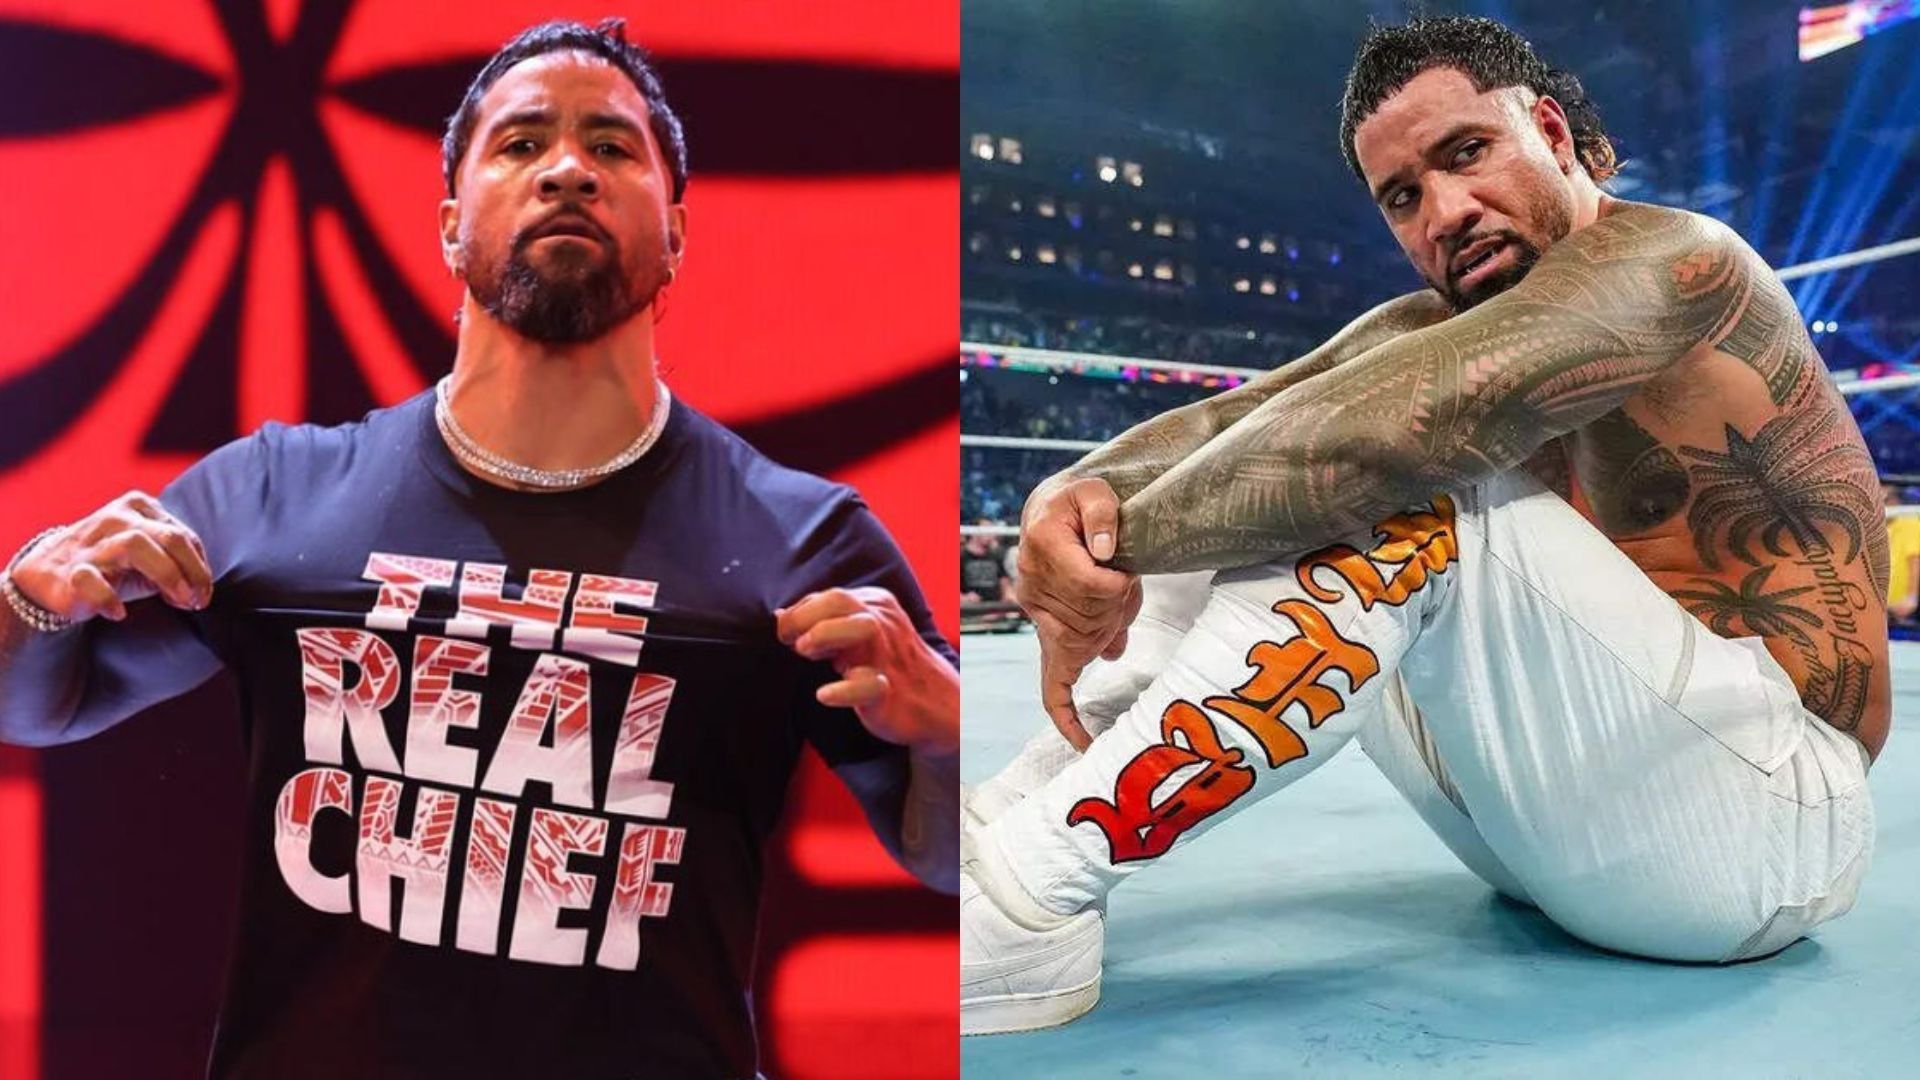 Jey Uso recently quit WWE after losing to Roman Reigns